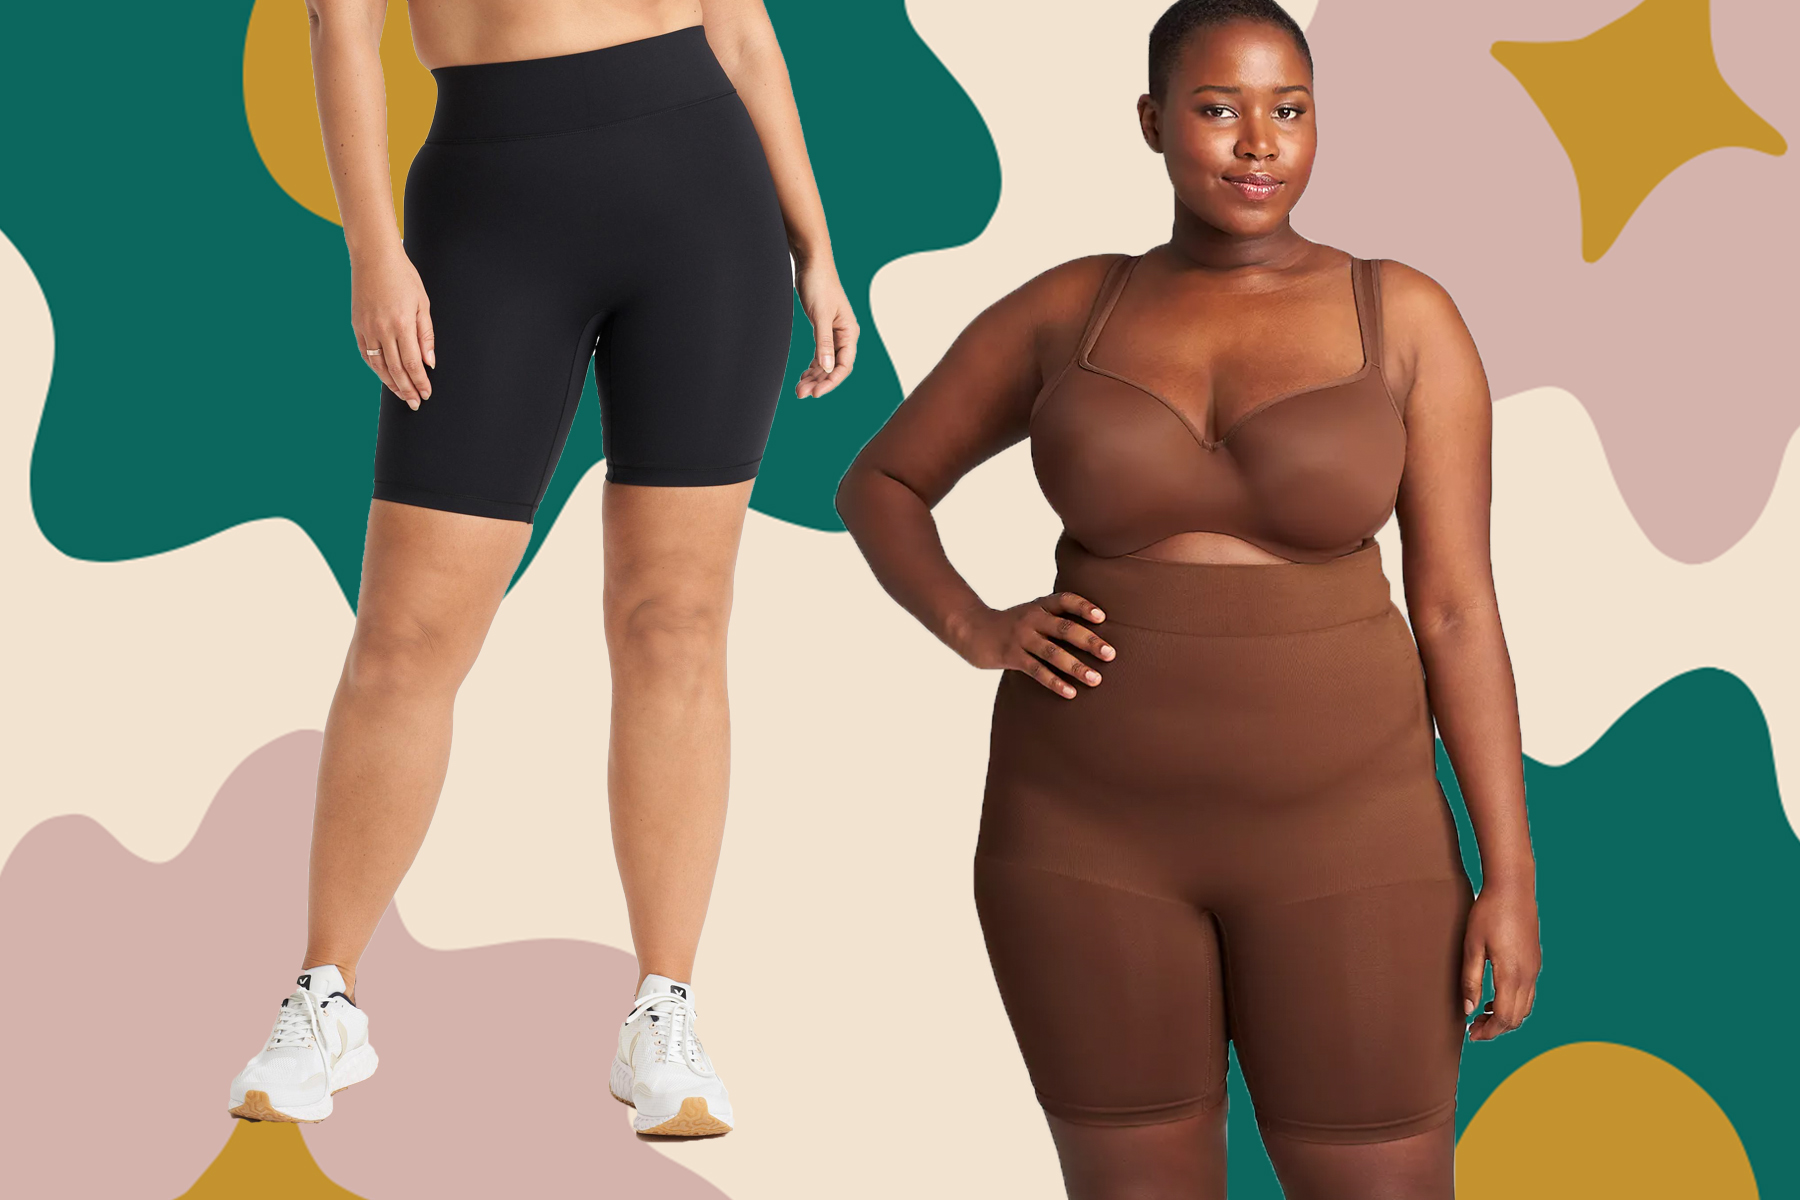 https://hellogiggles.com/wp-content/uploads/sites/7/2021/05/26/anti-chafing-shorts.jpg?quality=82&strip=all